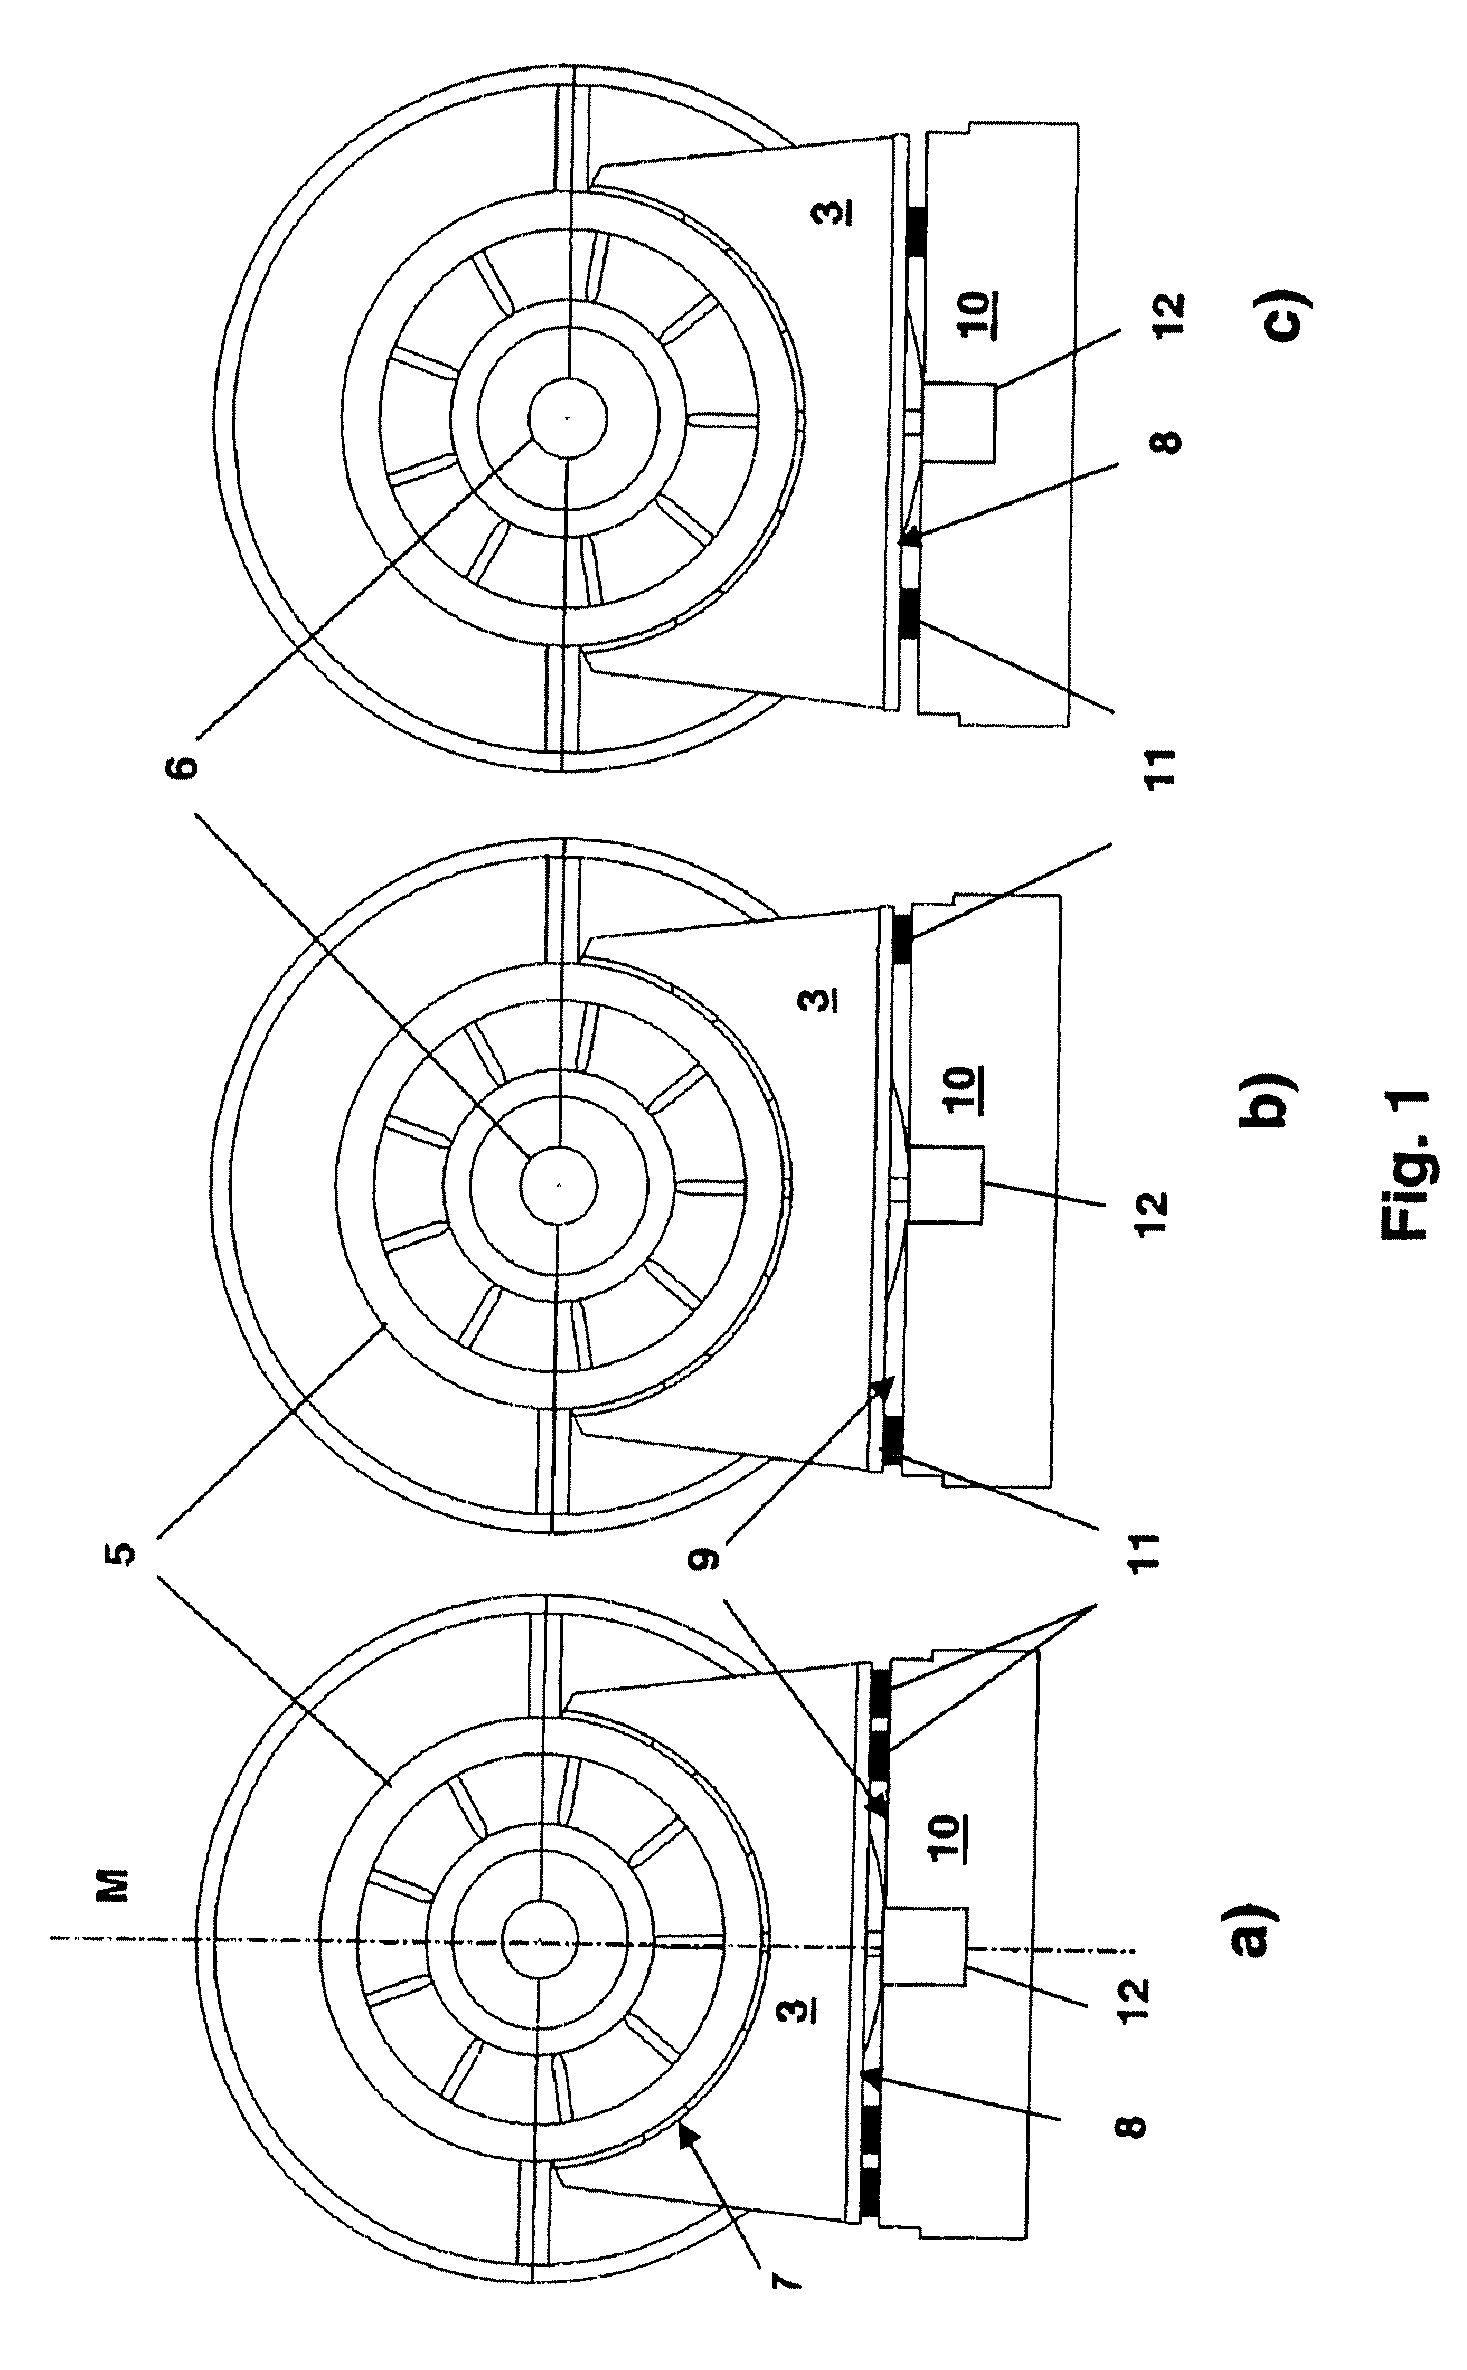 Device and method for mounting a turbine engine